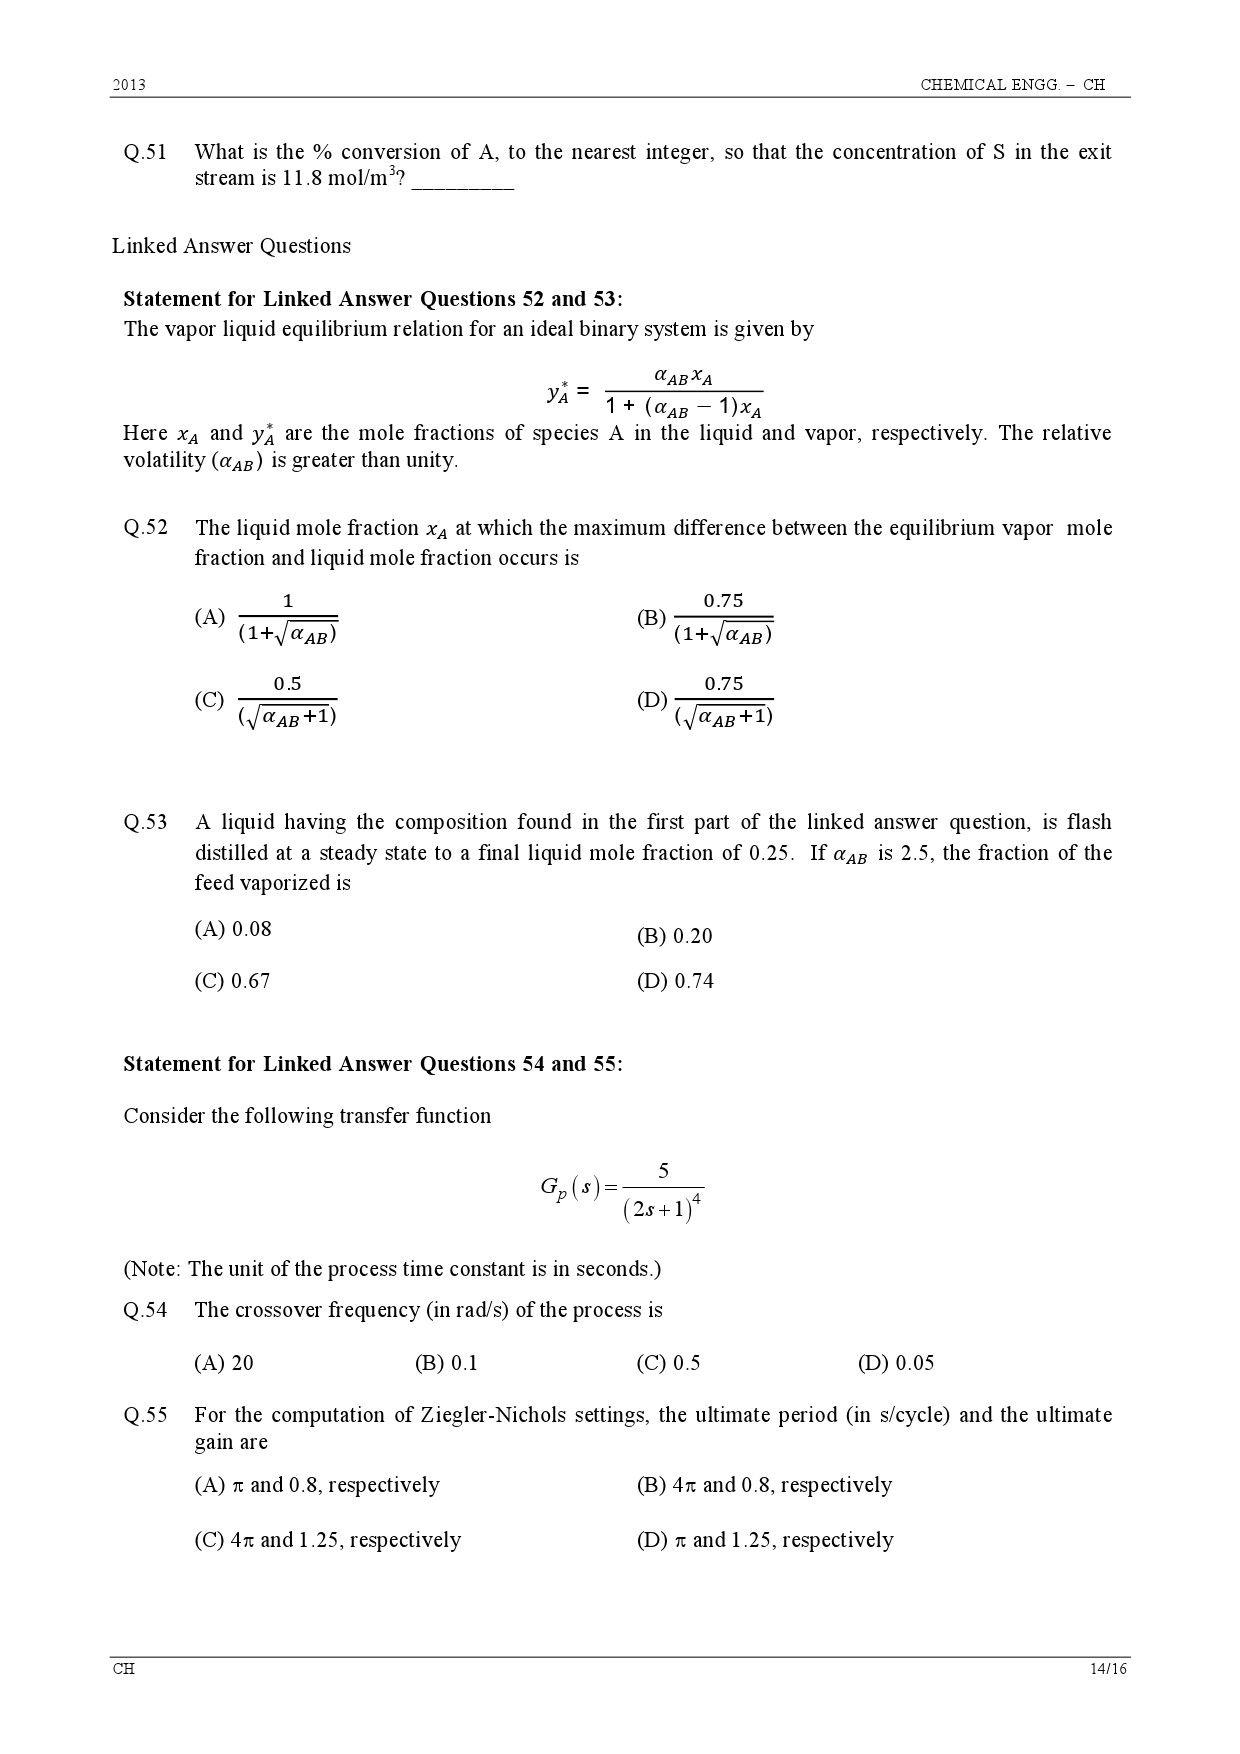 GATE Exam Question Paper 2013 Chemical Engineering 14